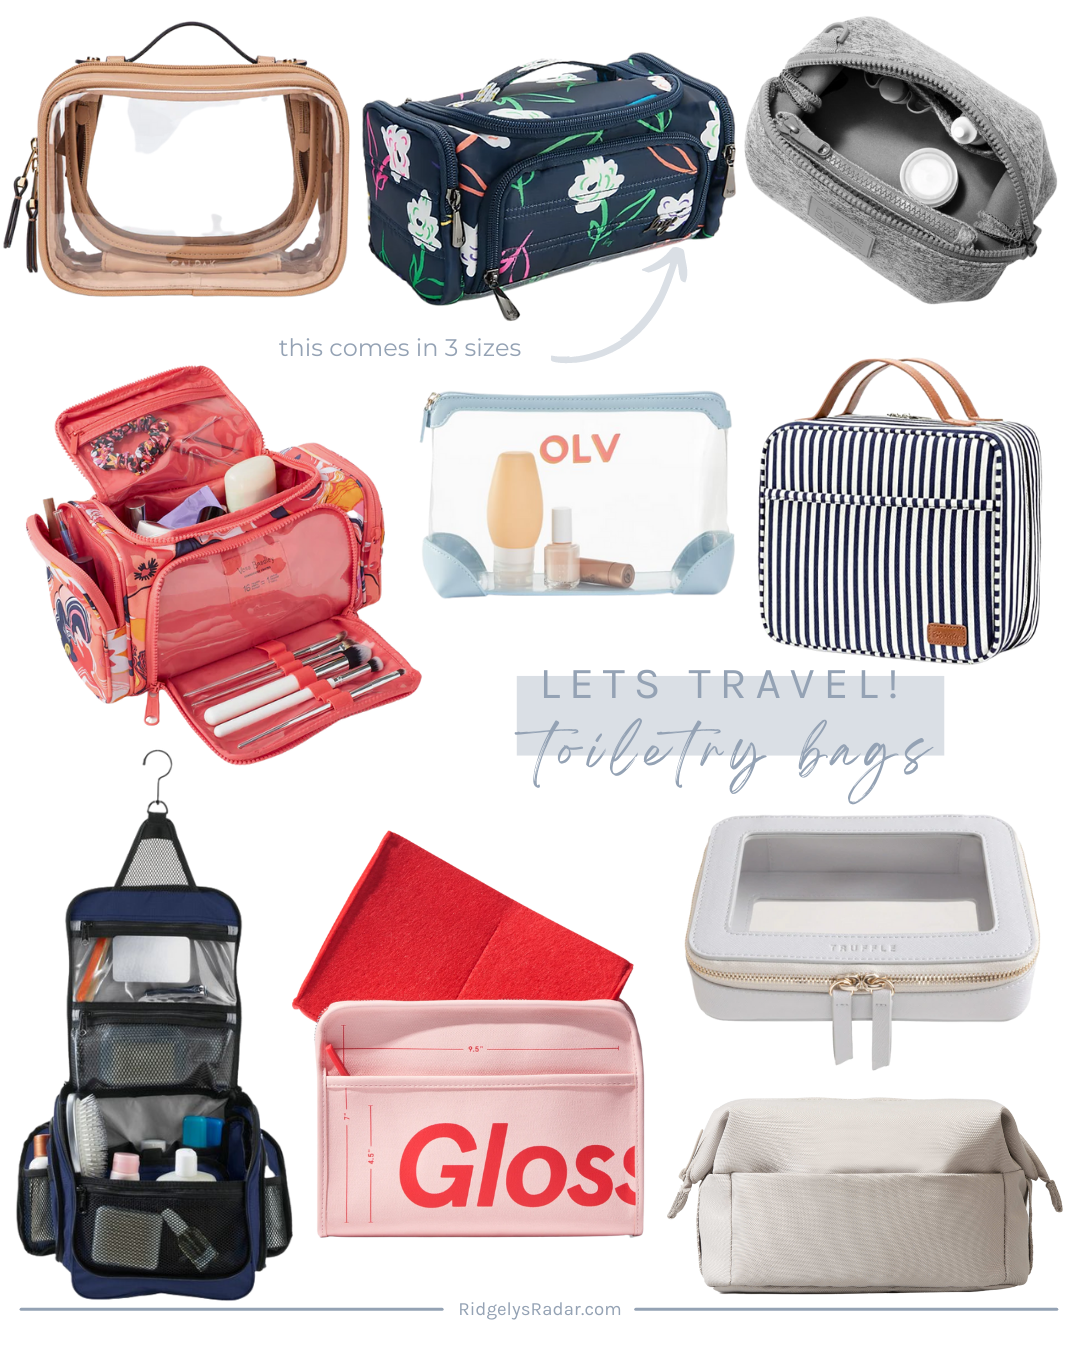 Be ready for your next trip with one of the best toiletry travel bags! Fill it up with your favorite travel essentials so you're ready to go!